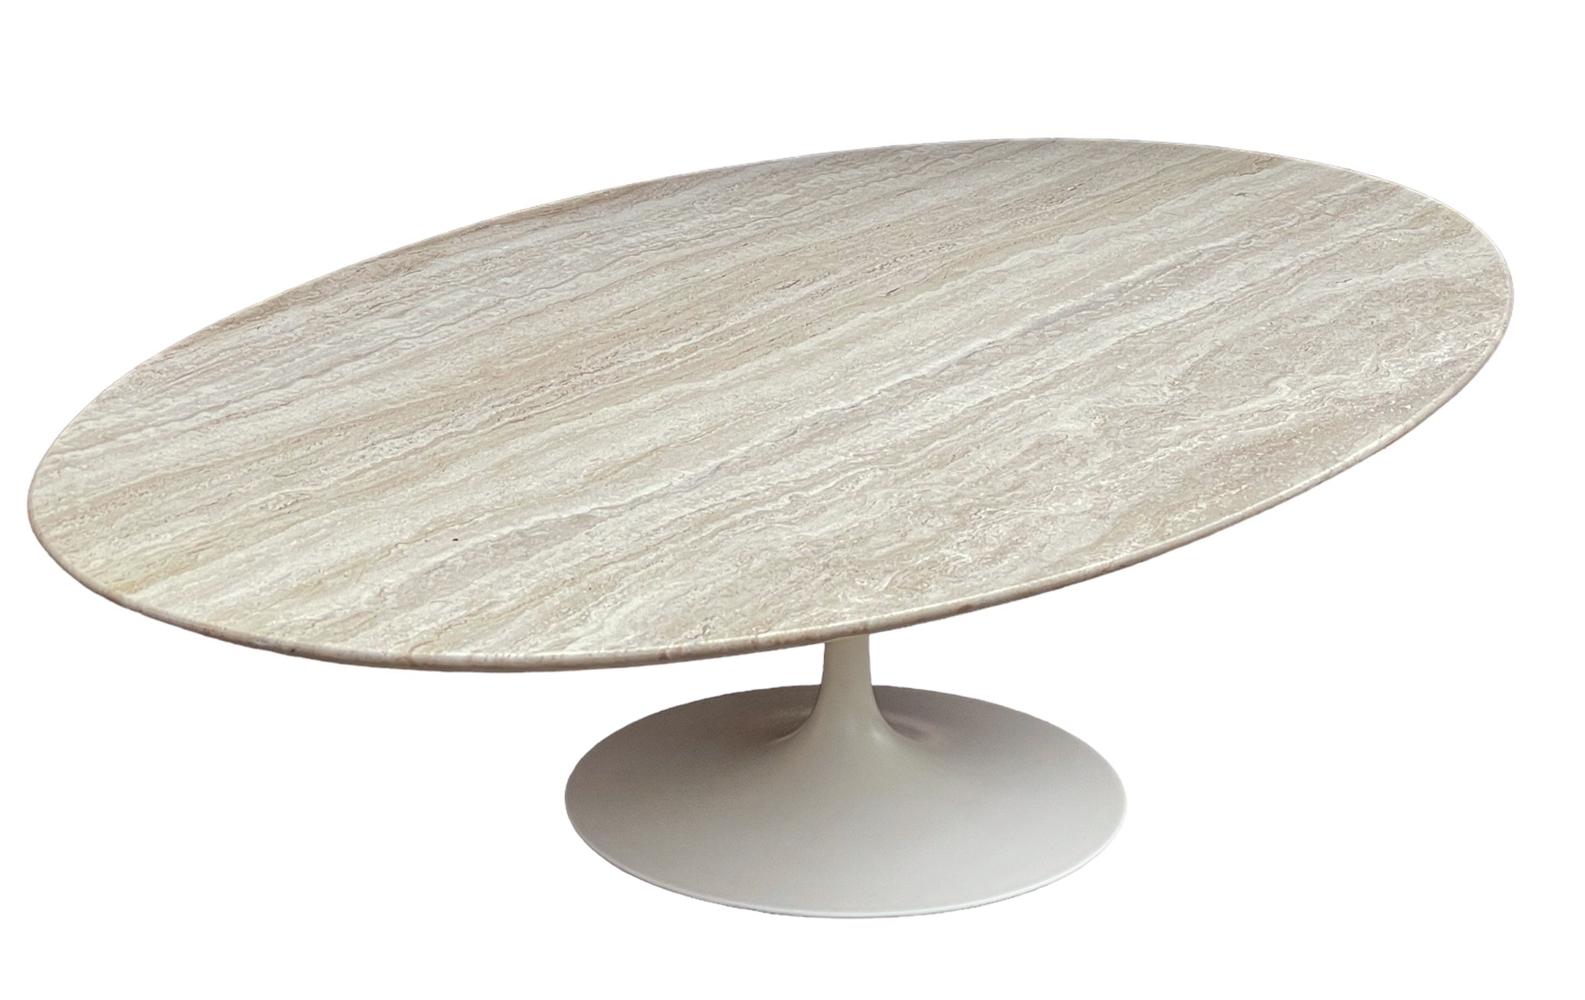 Mid Century Modern Oval Travertine Marble Cocktail Table by Saarinen for Knoll  For Sale 1